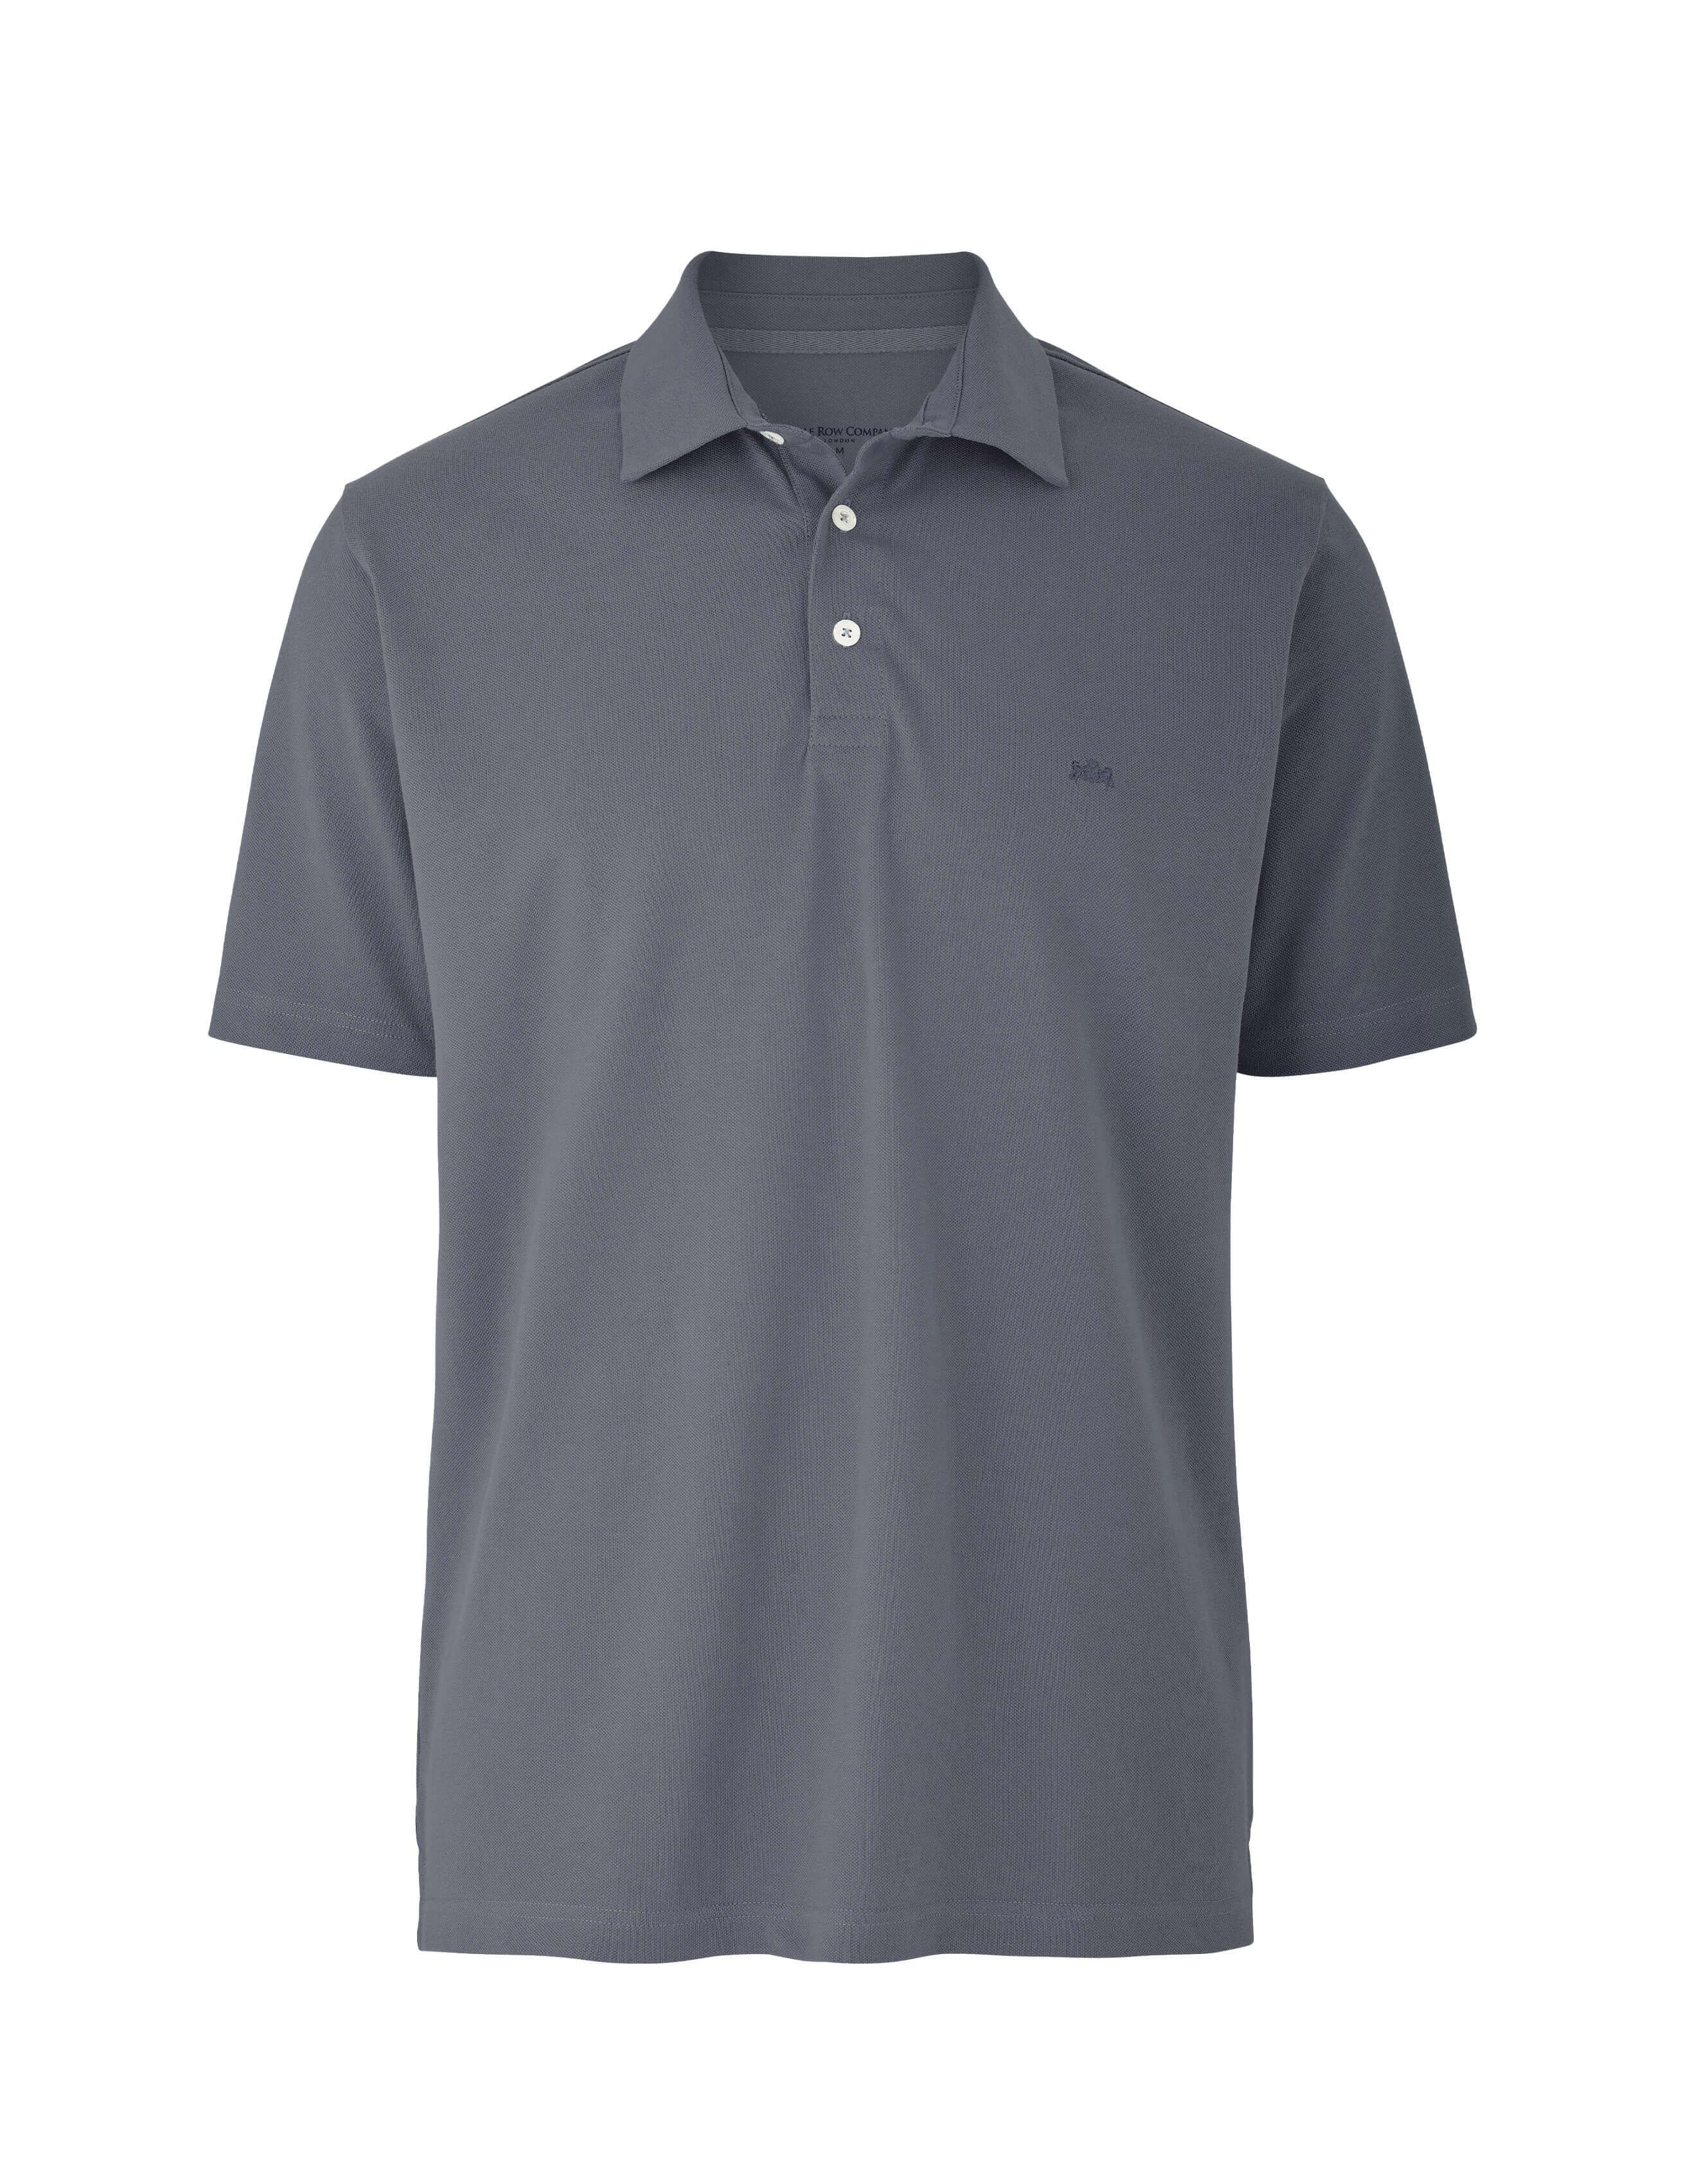 Men’s grey short sleeve polo shirt in classic fit shape | Savile Row Co